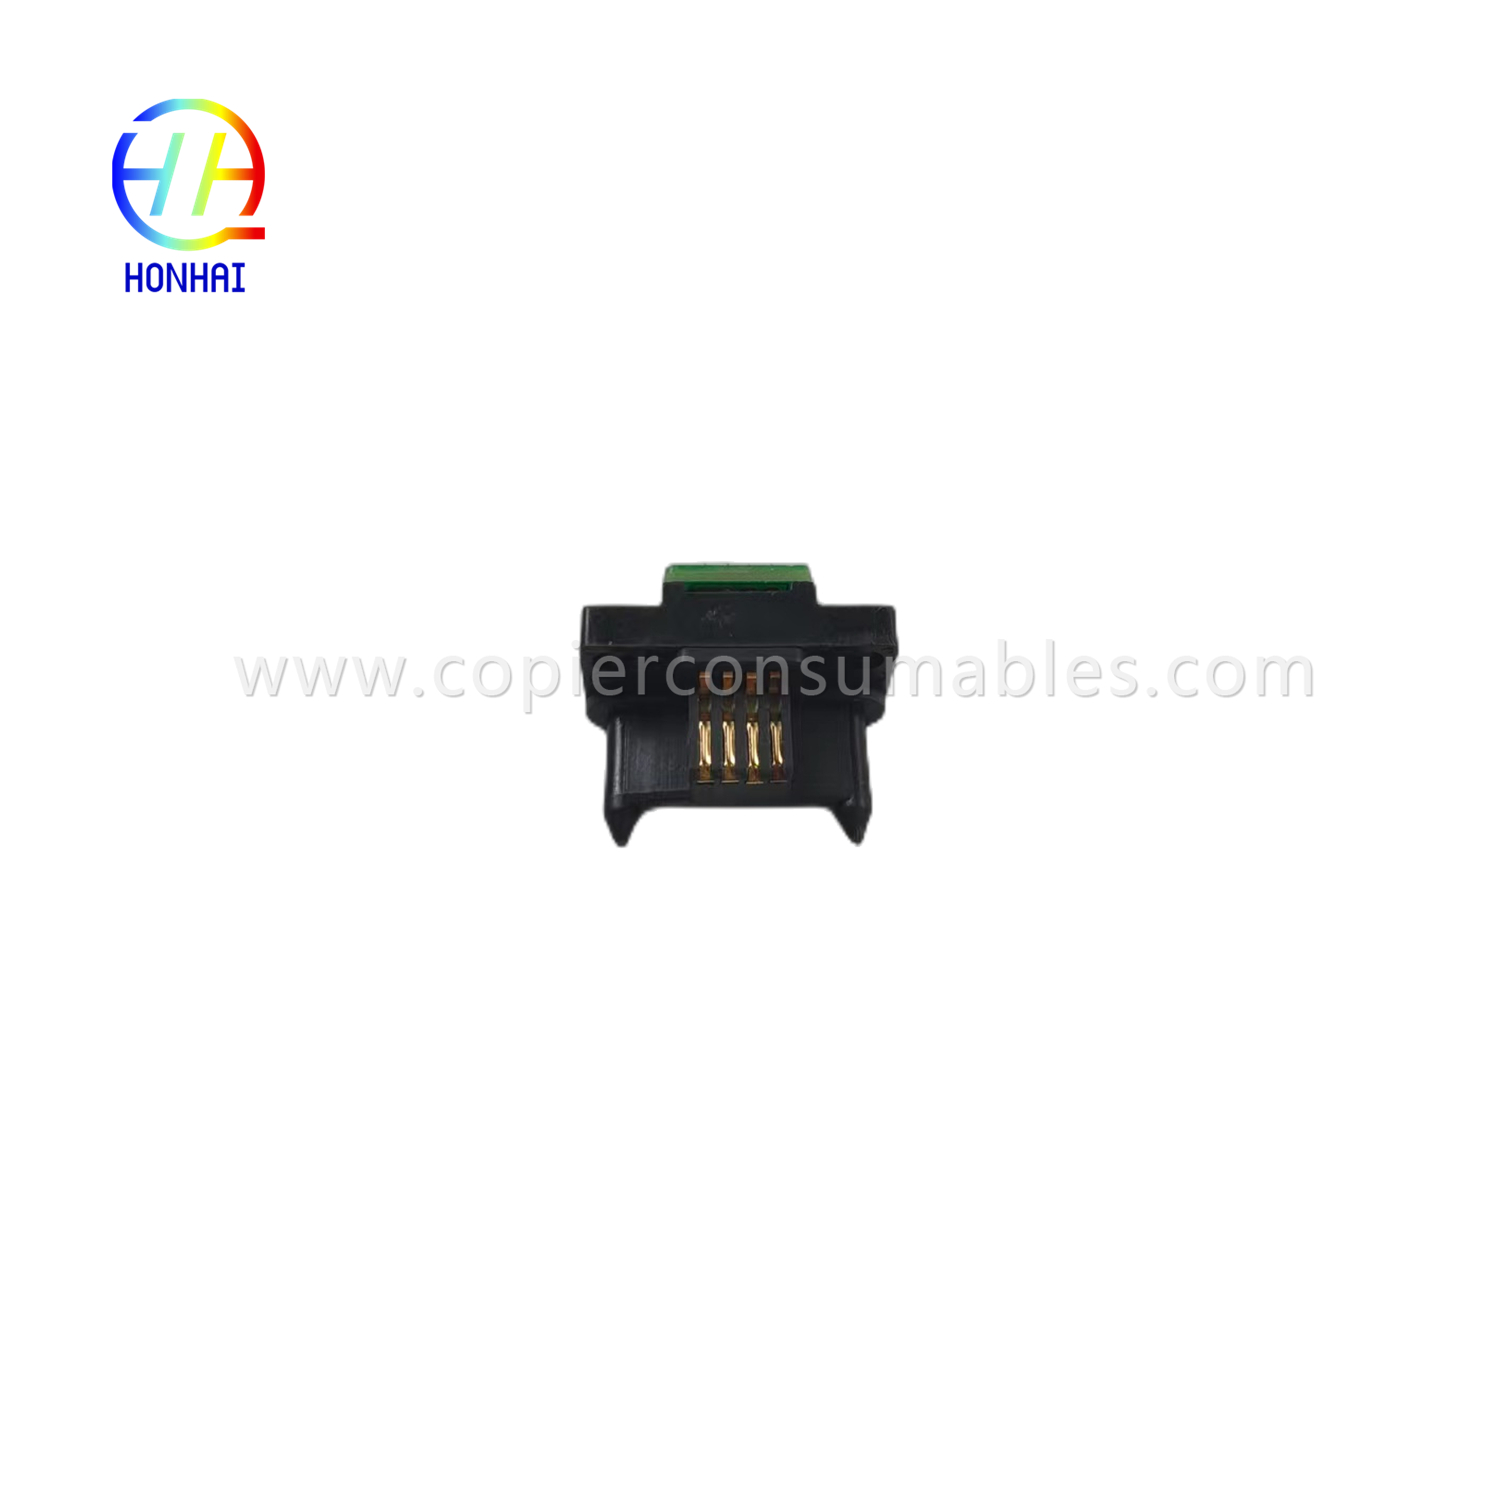 Chip trống cho Xerox 113R00673 113R673 Workcenter 5755 5875 5865 5845 5855 5875 5890 Chip (3)_副本